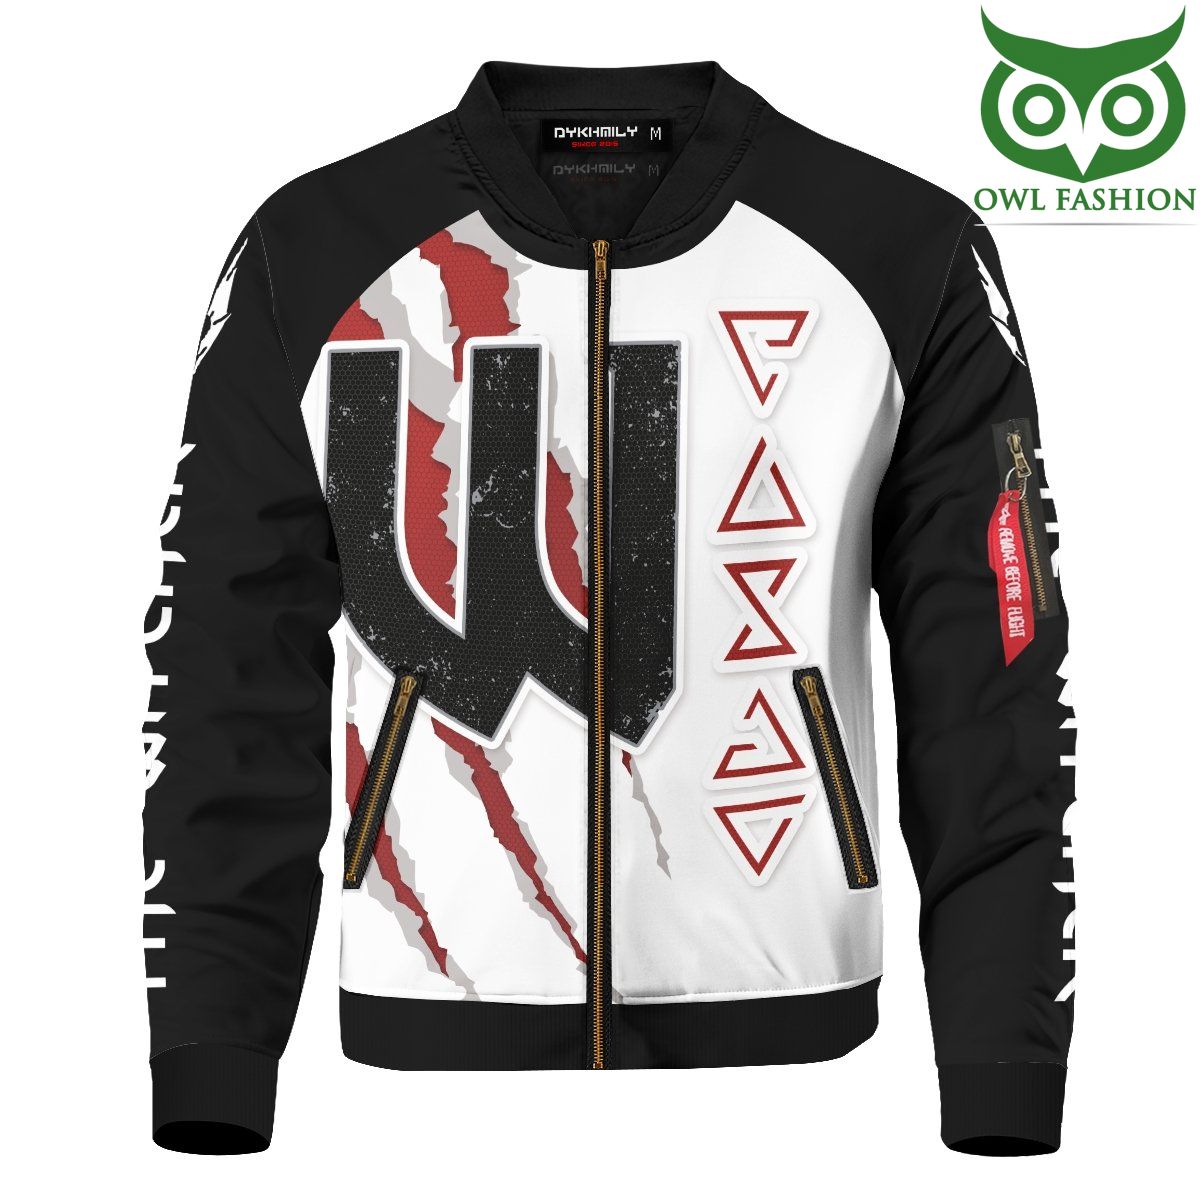 The Witcher Printed Bomber Jacket for fans